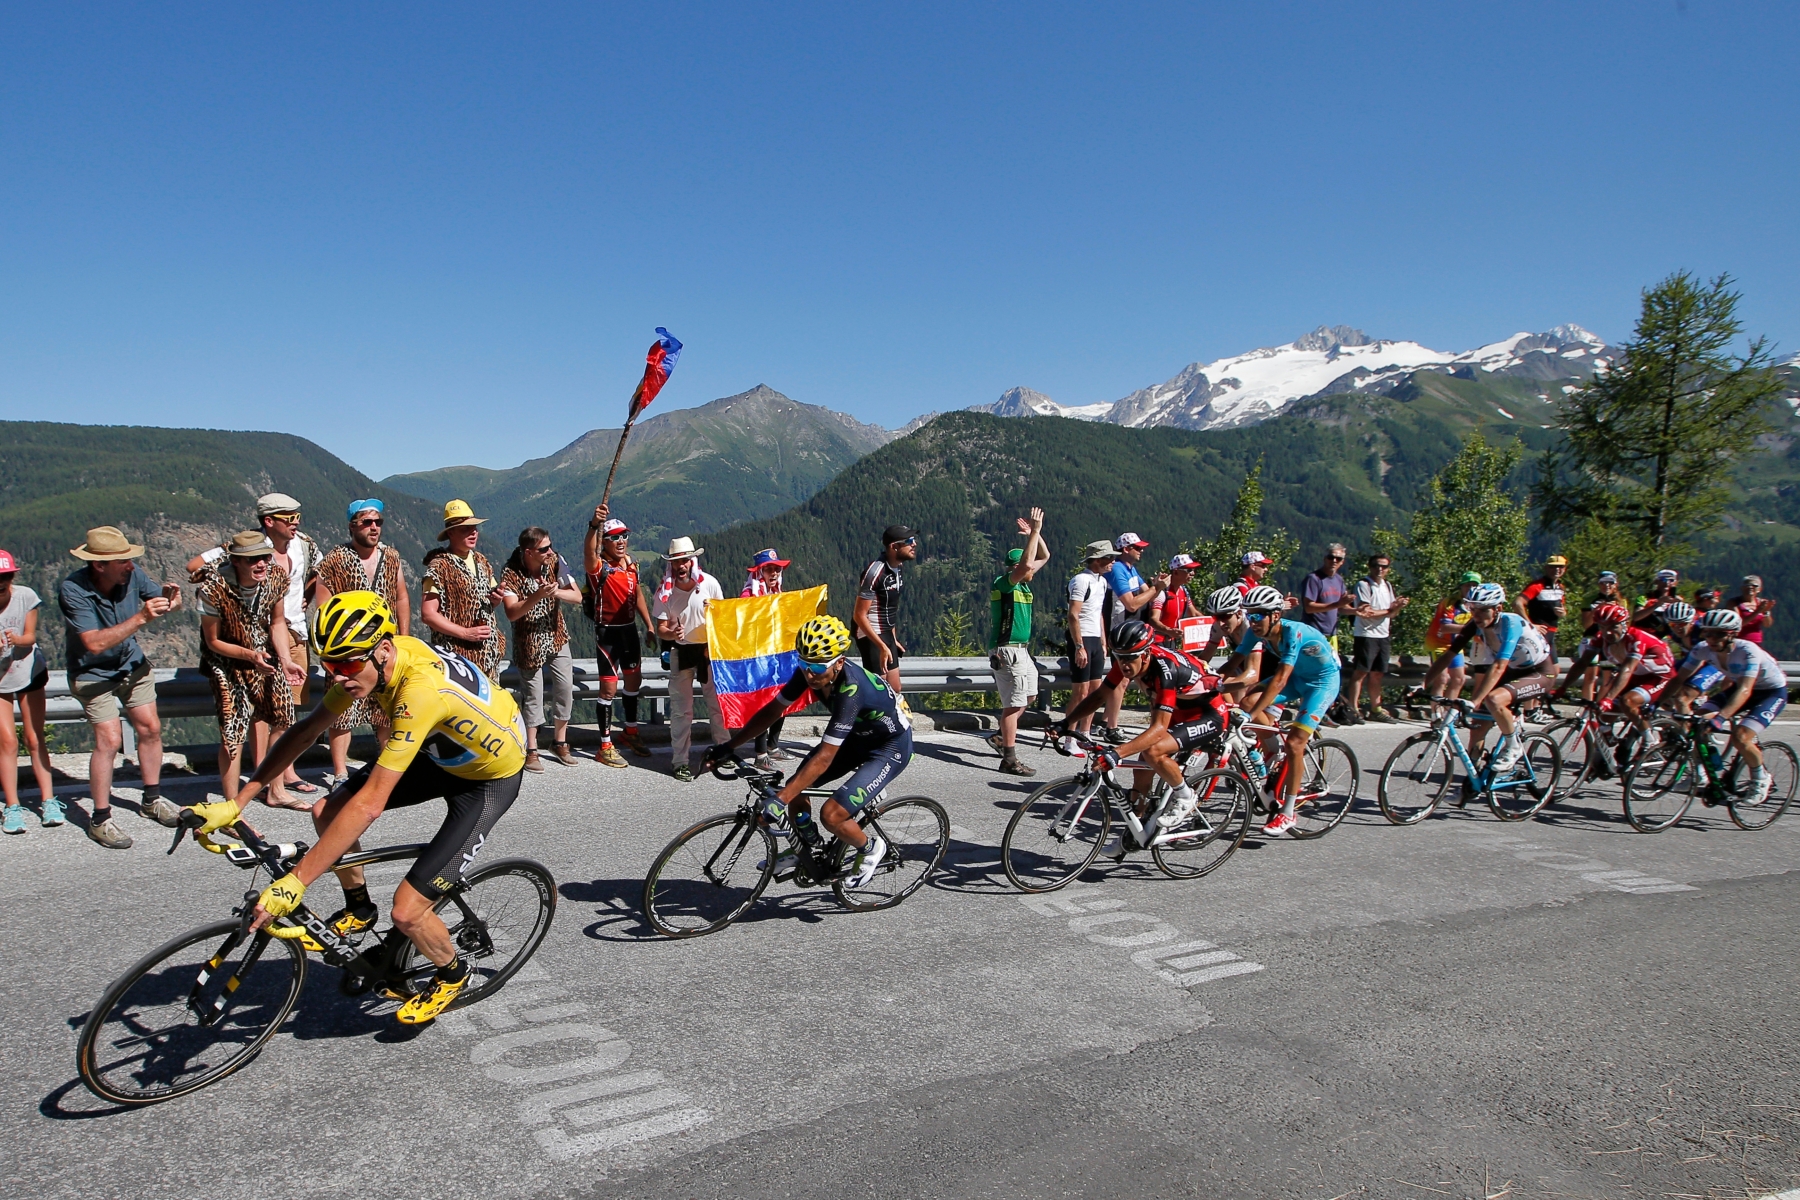 Britain's Chris Froome, wearing the overall leader's yellow jersey, is followed by Colombia's Nairo Quintana, Australia's Richie Porte, Netherlands' Bauke Mollema and France's Romain Bardet, during the seventeenth stage of the Tour de France cycling race over 184.5 kilometers (114.3 miles) with start in Bern and finish in Finhaut-Emosson, Switzerland, Wednesday, July 20, 2016. (AP Photo/Christophe Ena)tour de france RAD TOUR DE FRANCE 2016